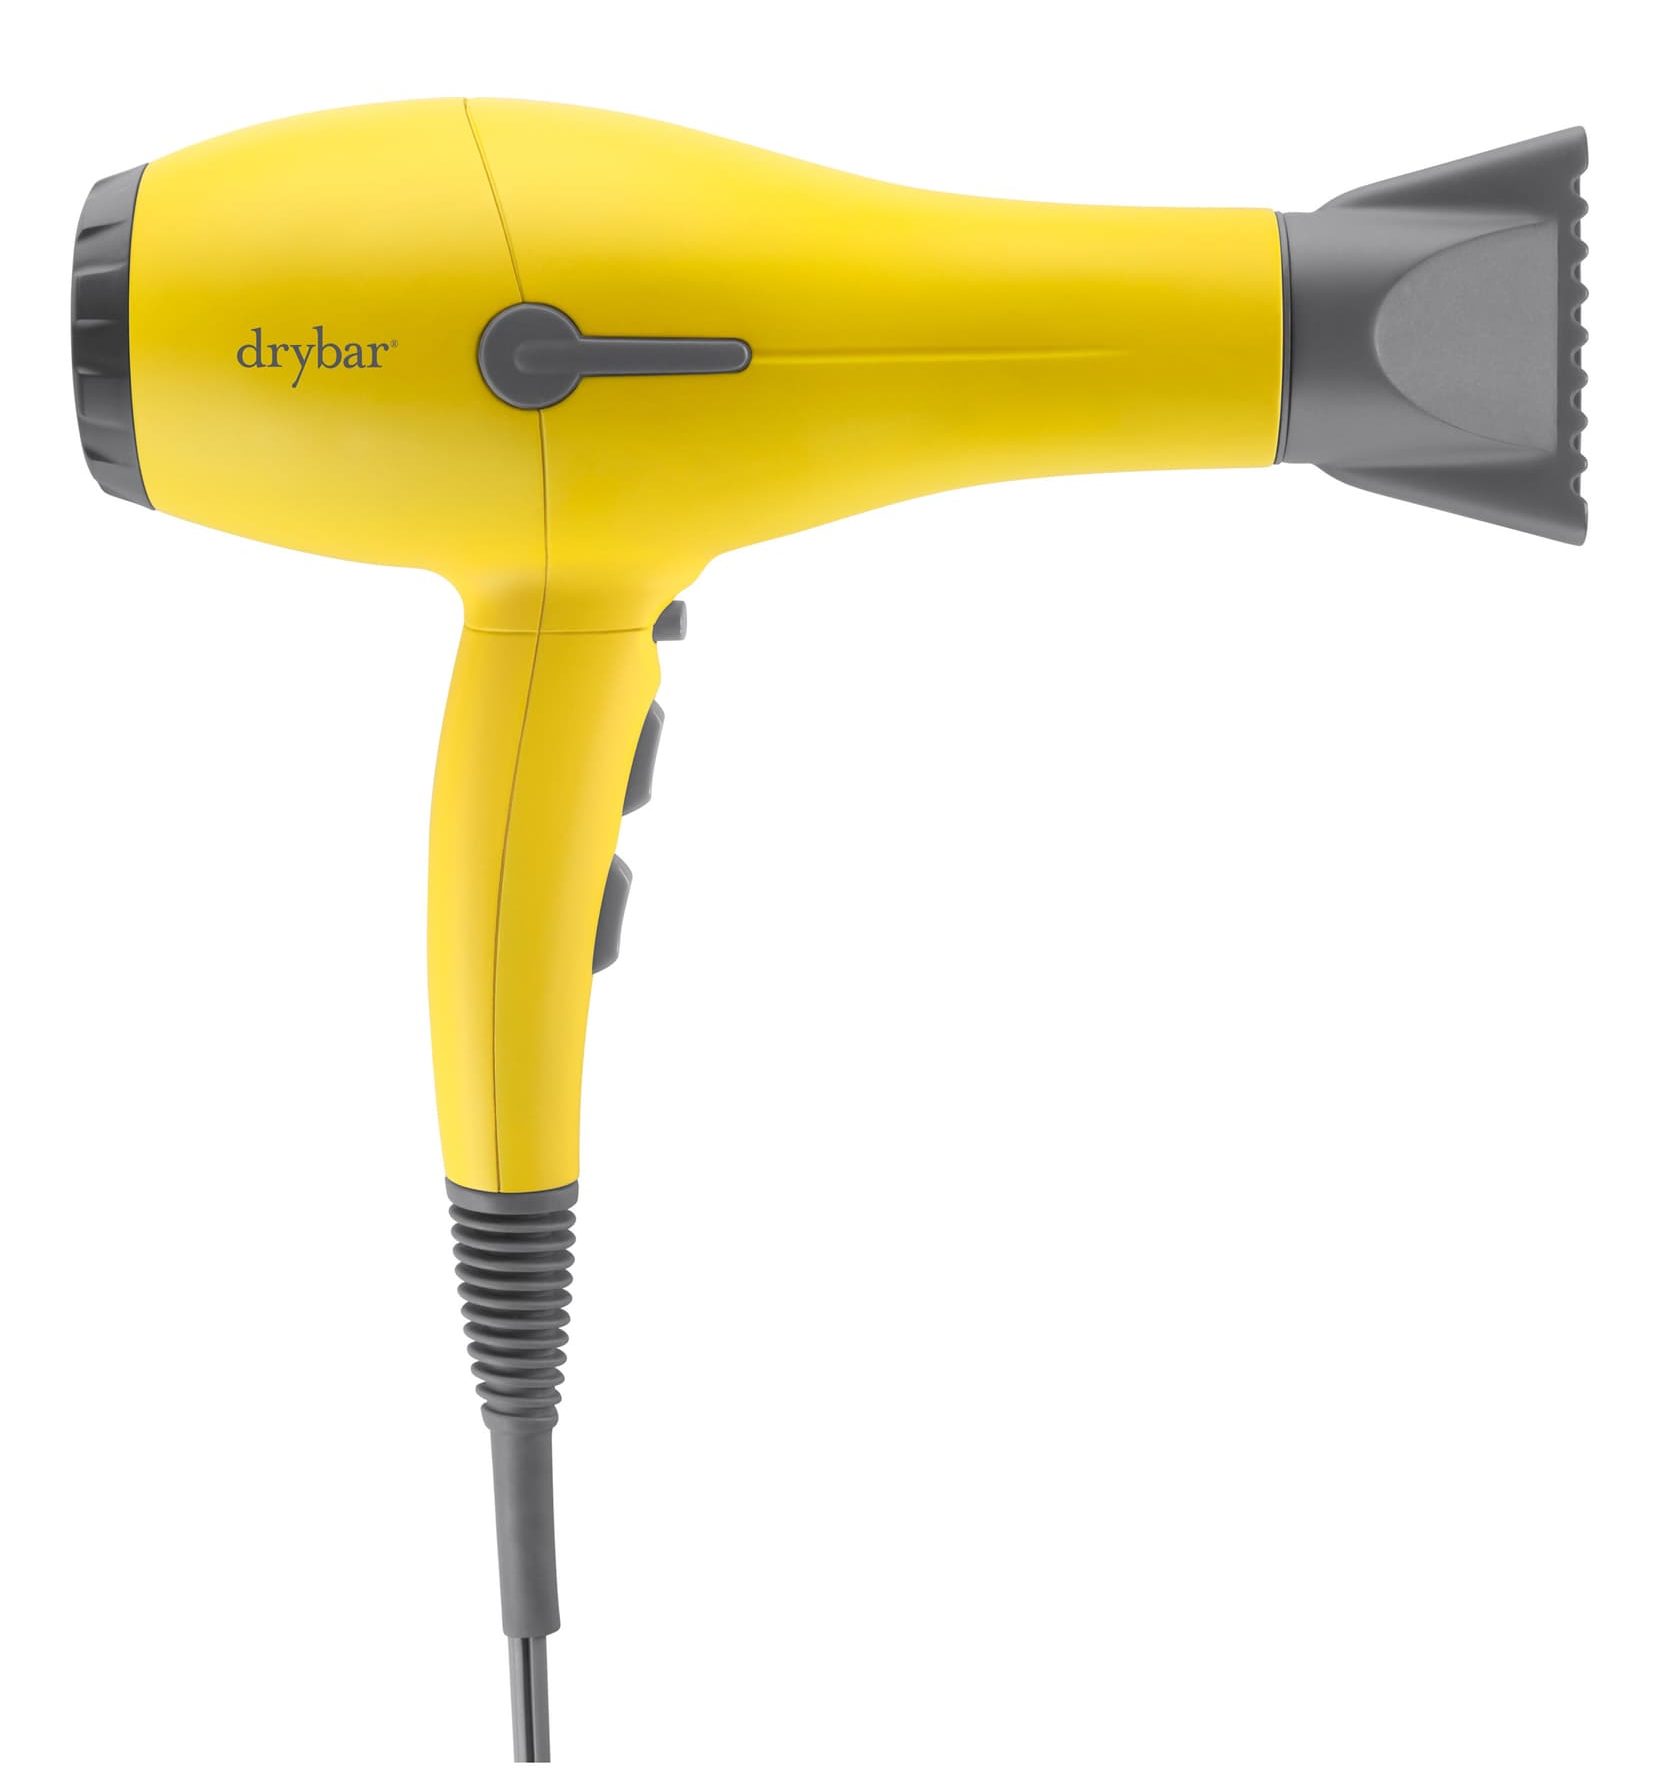 Best Gifts For Her 2022: Dry Bar Buttercup Yellow Hair Dryer for Wife 2022